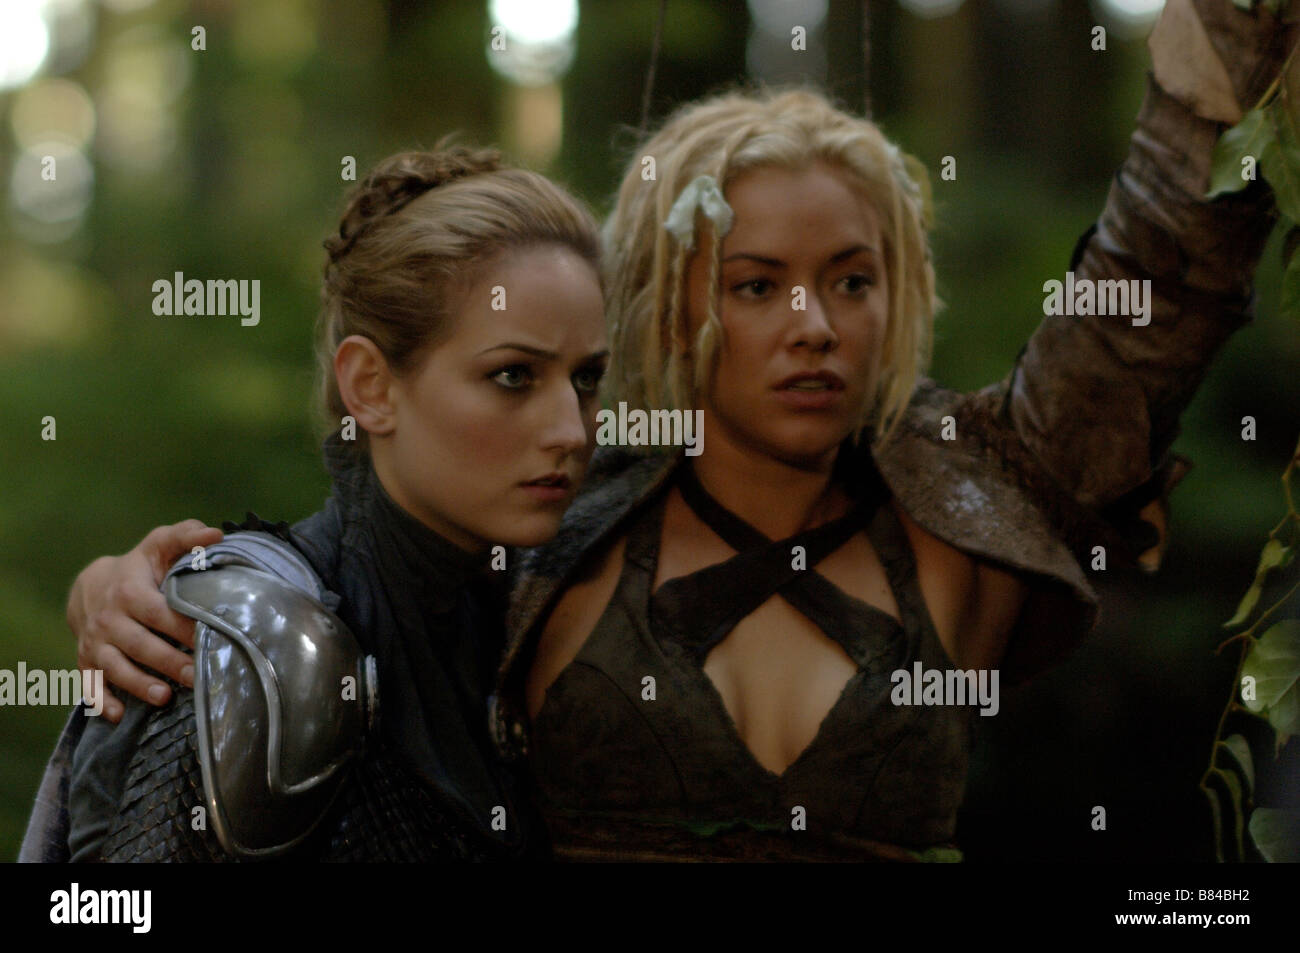 In the Name of the King: A Dungeon Siege Tale In the Name of the King: A Dungeon Siege Tale  Year: 2007 - Canada, USA, Germany Leelee Sobieski, Kristanna Loken  Director: Uwe Boll Stock Photo